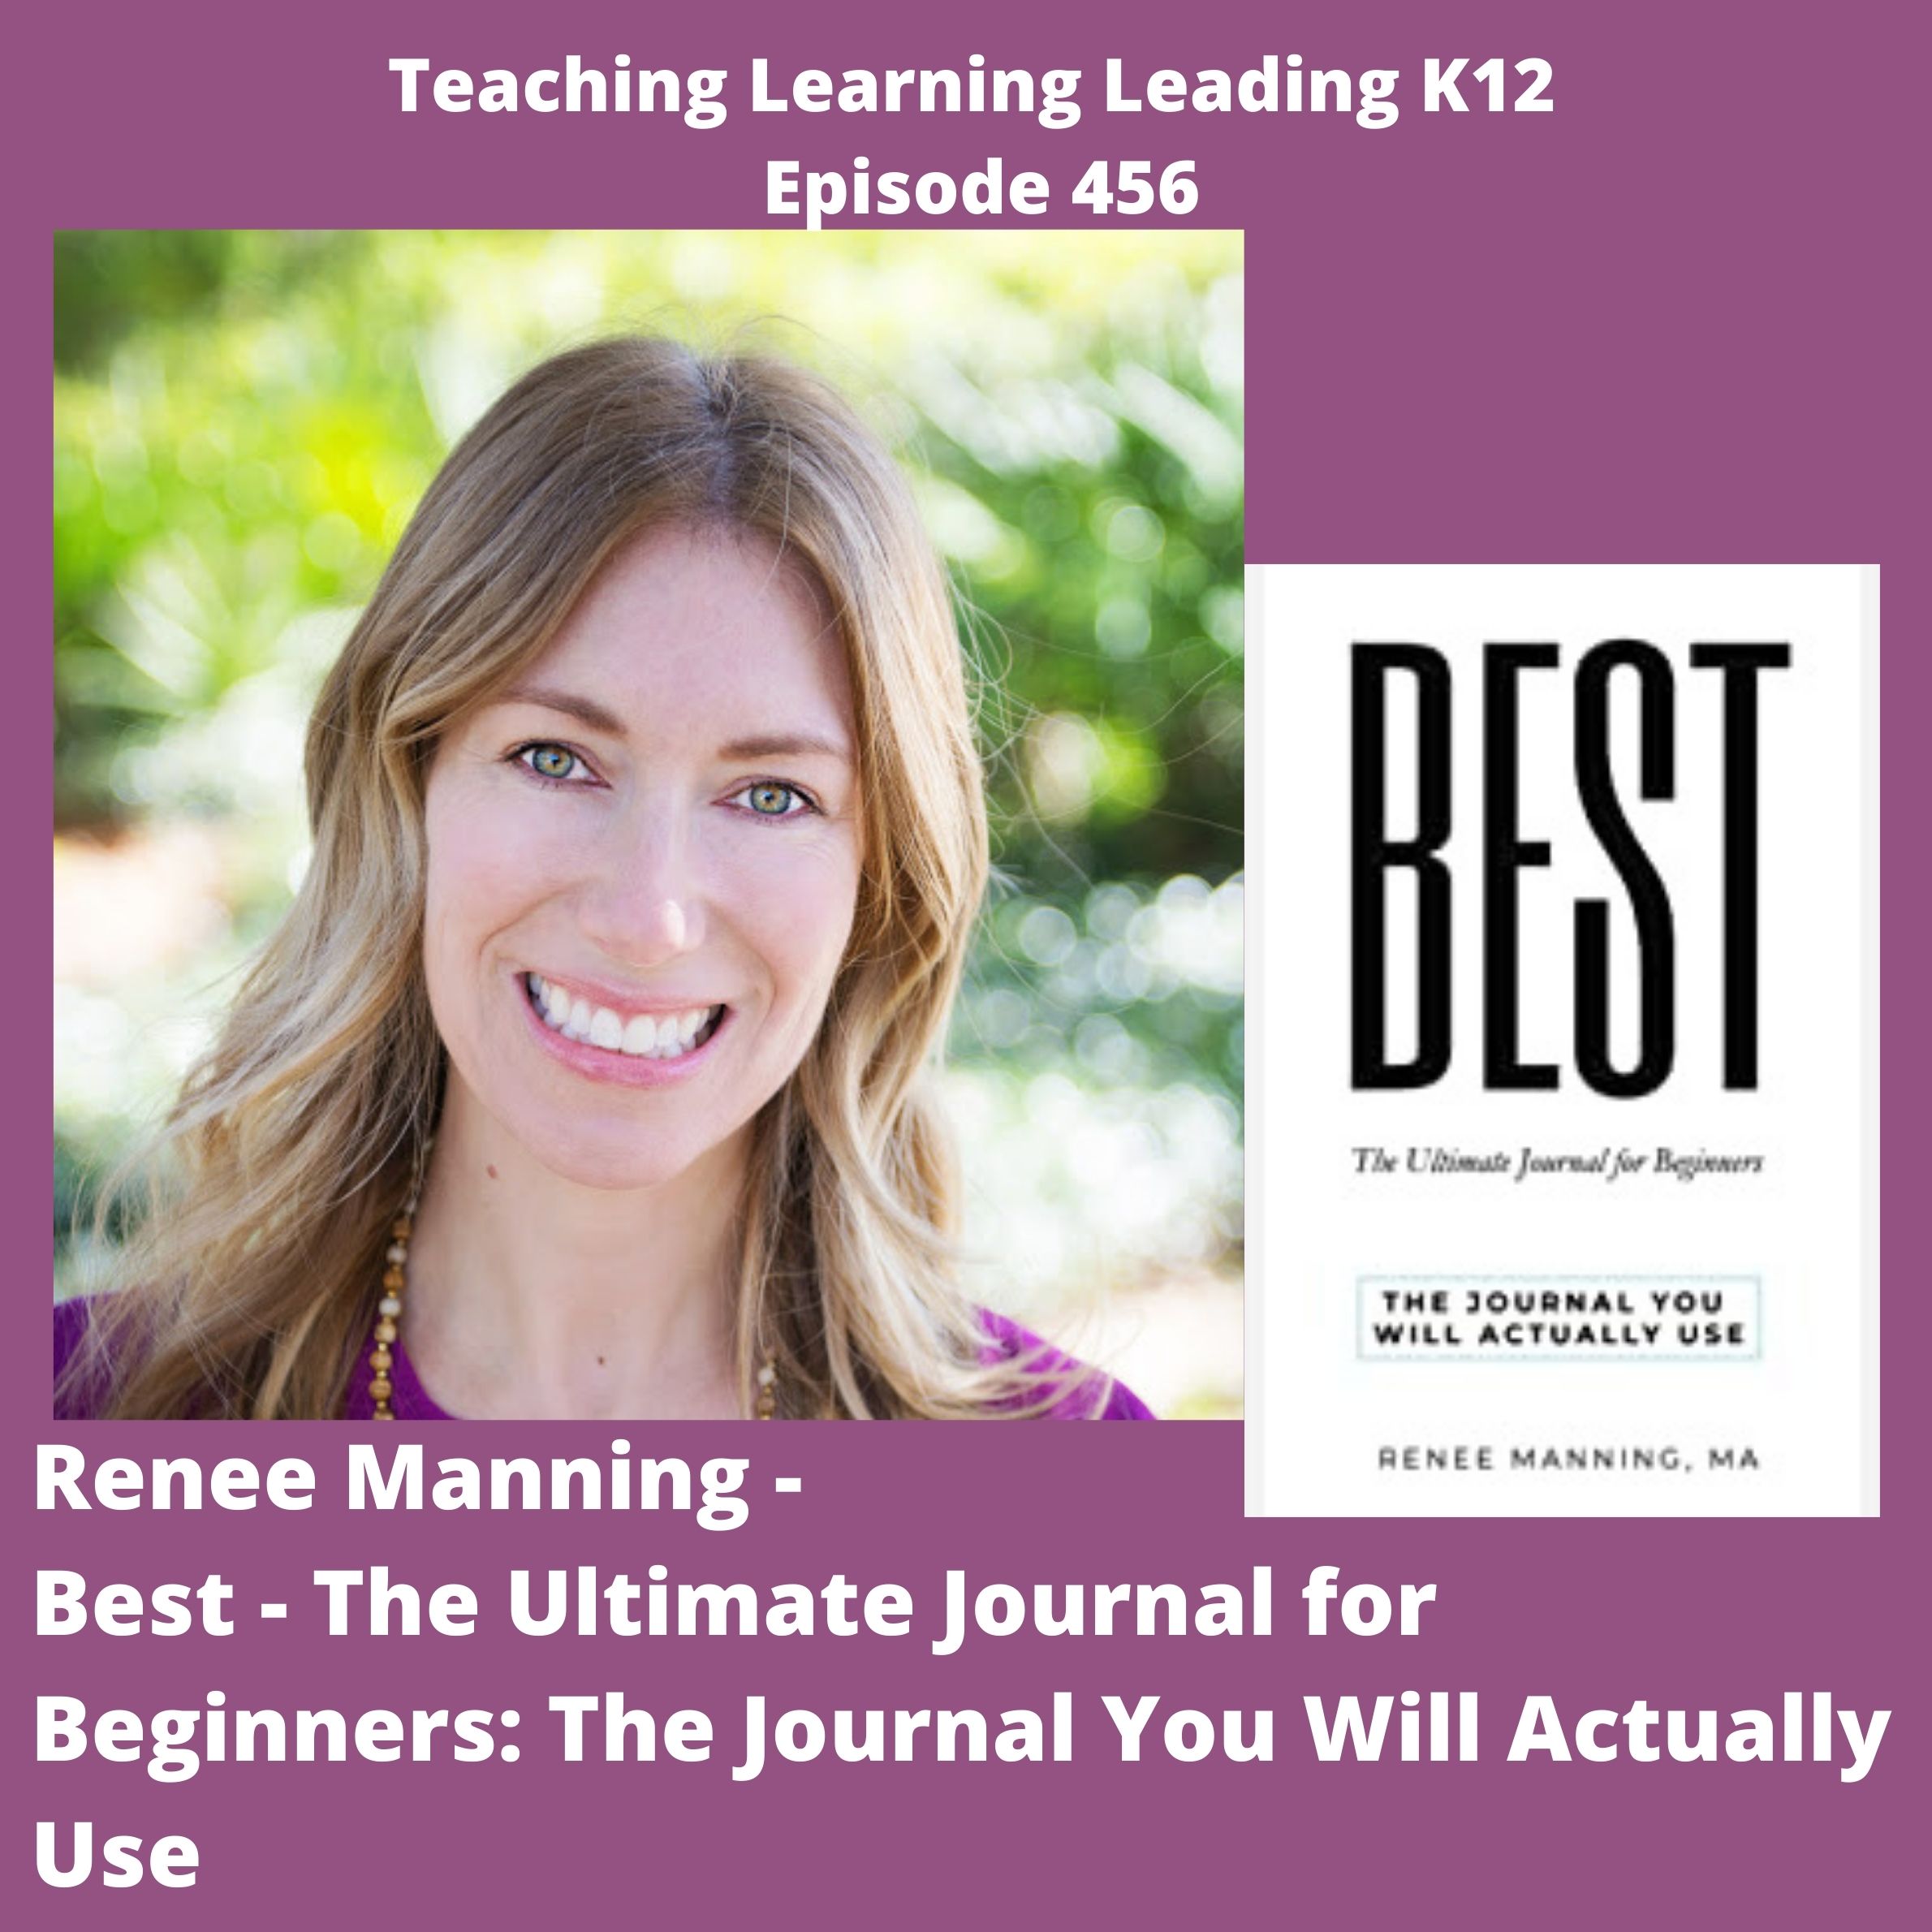 Renee Manning - Best - The Ultimate Journal for Beginners: The Journal You Will Actually Use - 456 Image